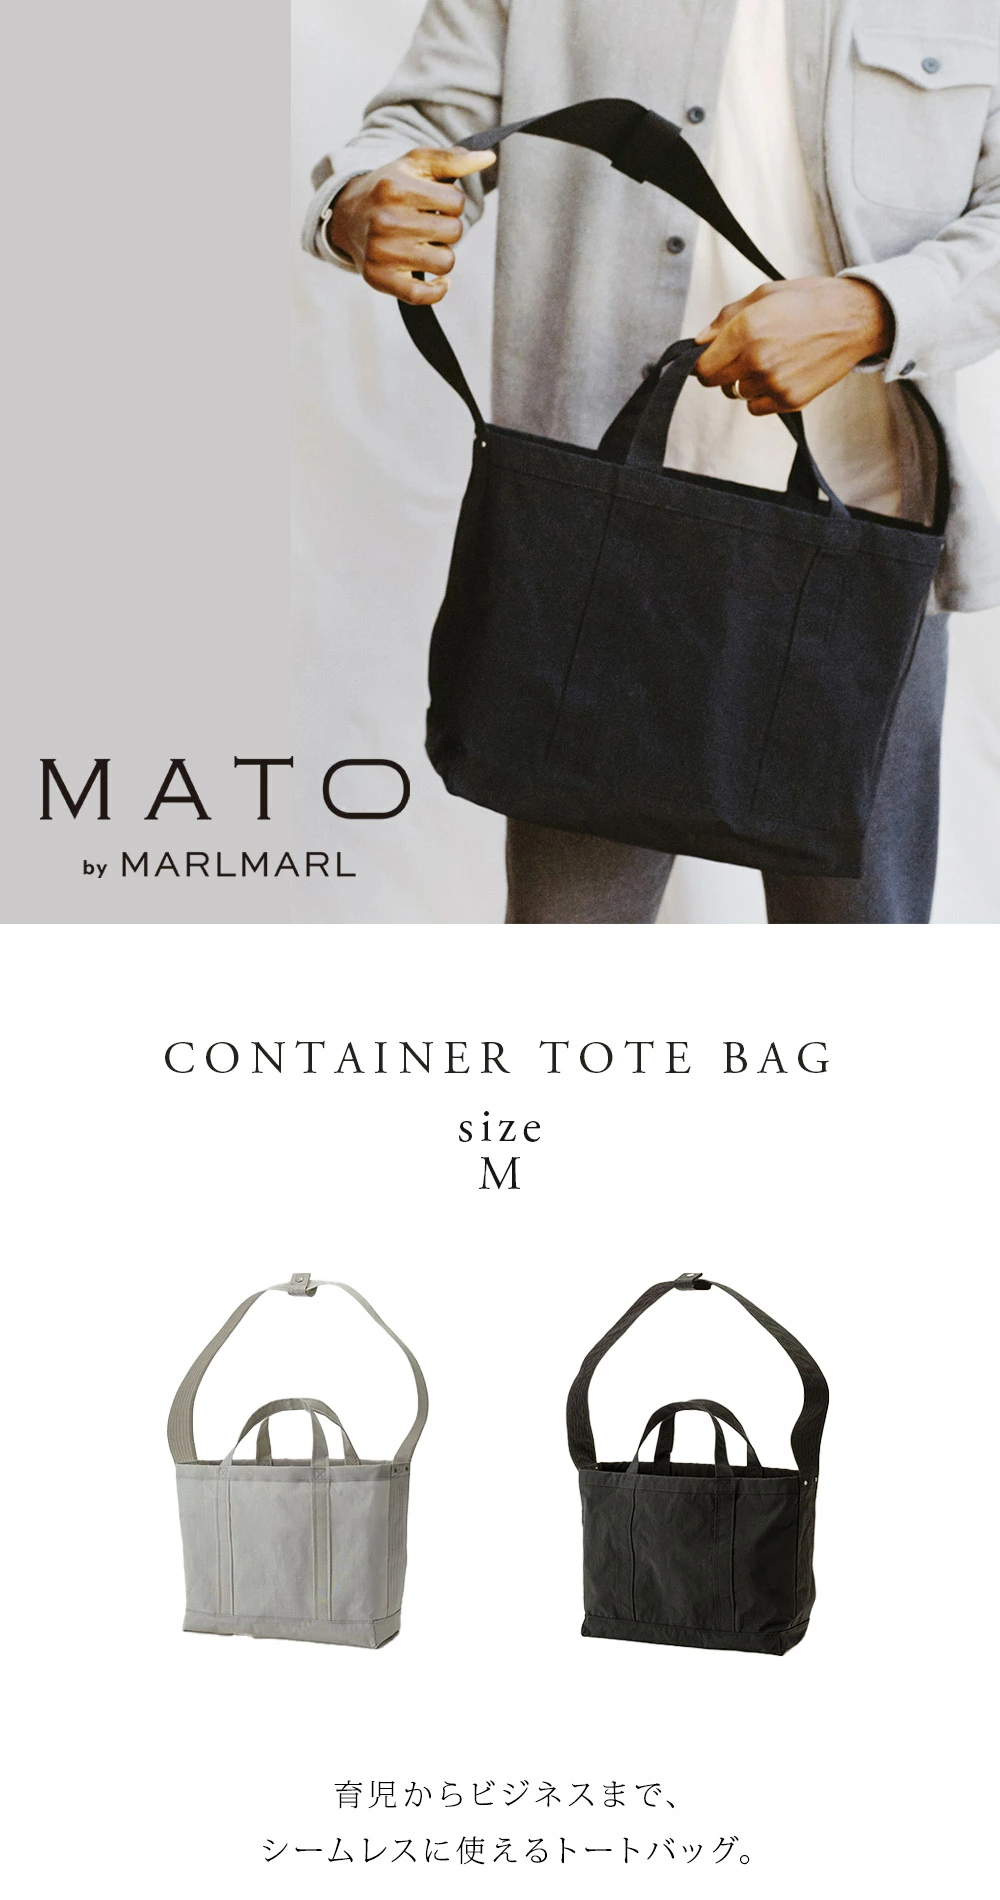 MATO by MARLMARL  CONTAINER TOTE BAG M麻100%ラミネート加工